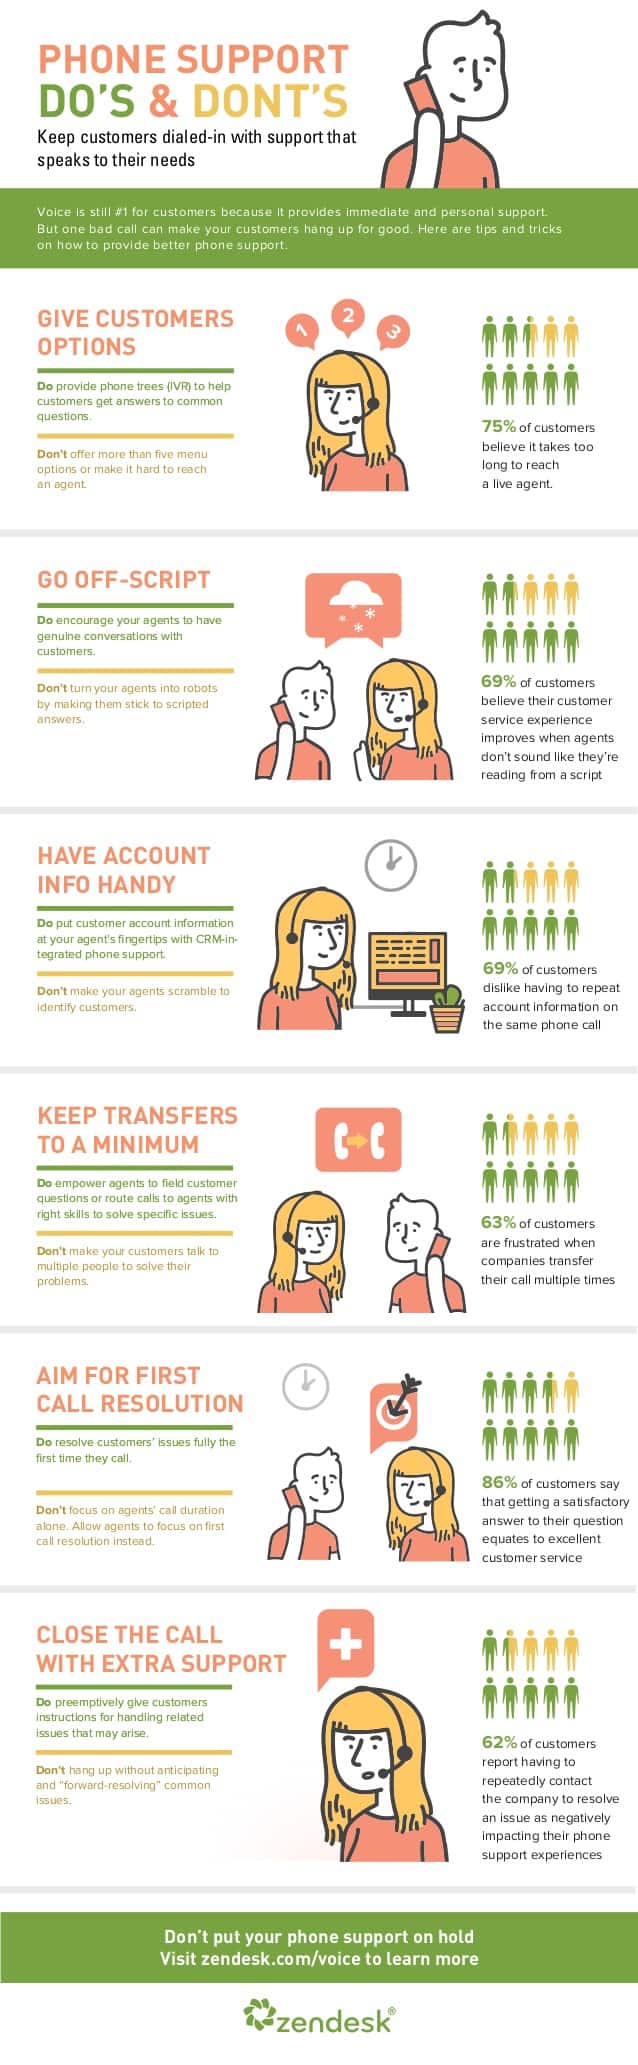 dos-and-donts-of-phone-support-zendesk-infographic-1-638